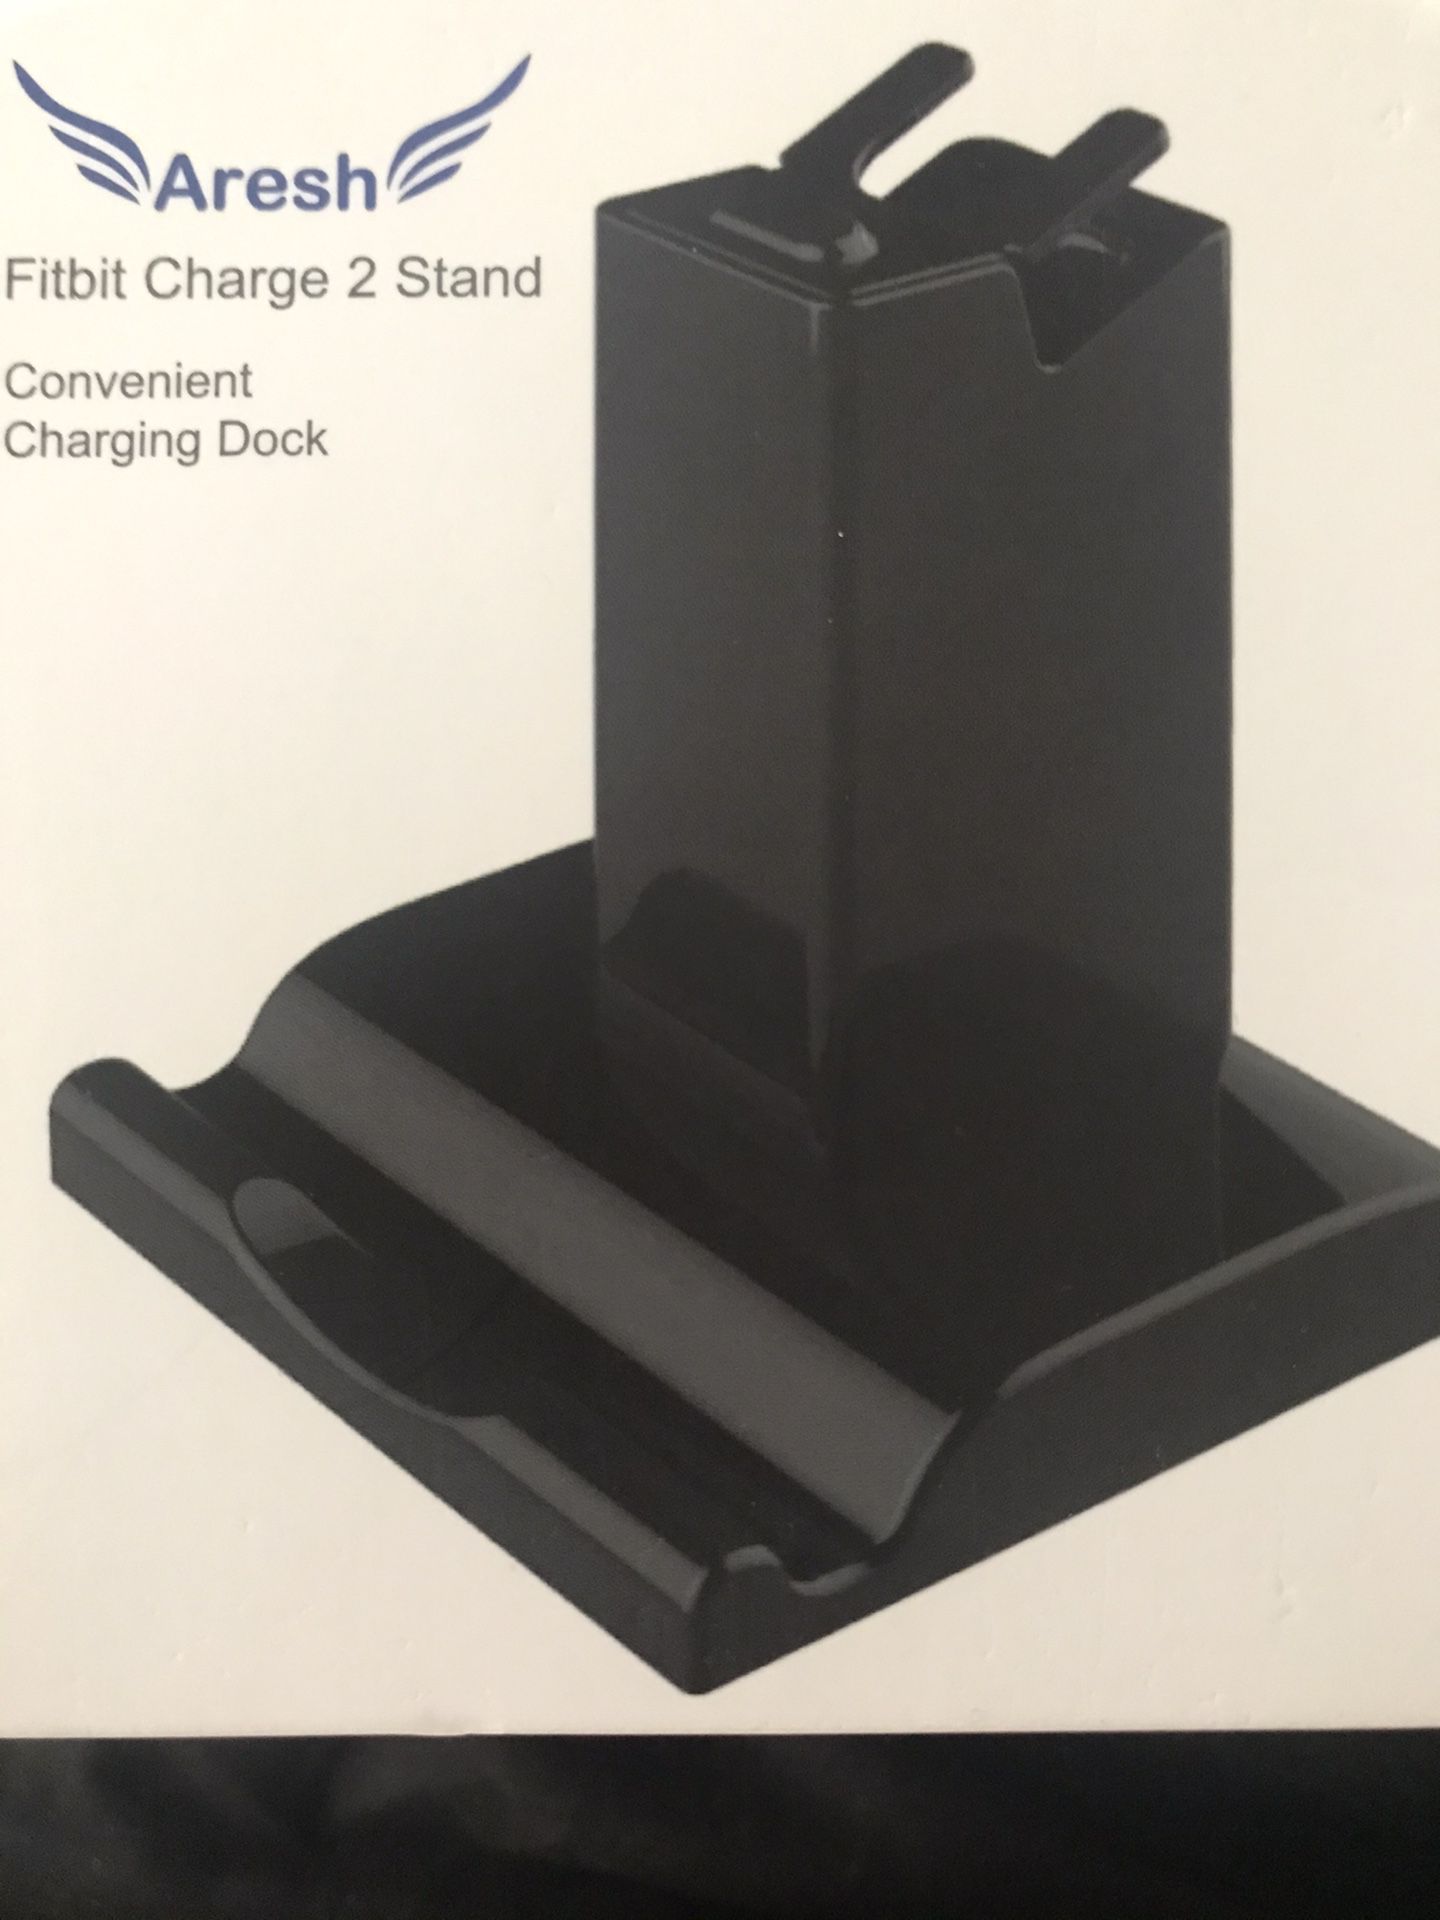 Fitbit Charge 2 Stand w/ Cellphone Stand Dock(See Description)